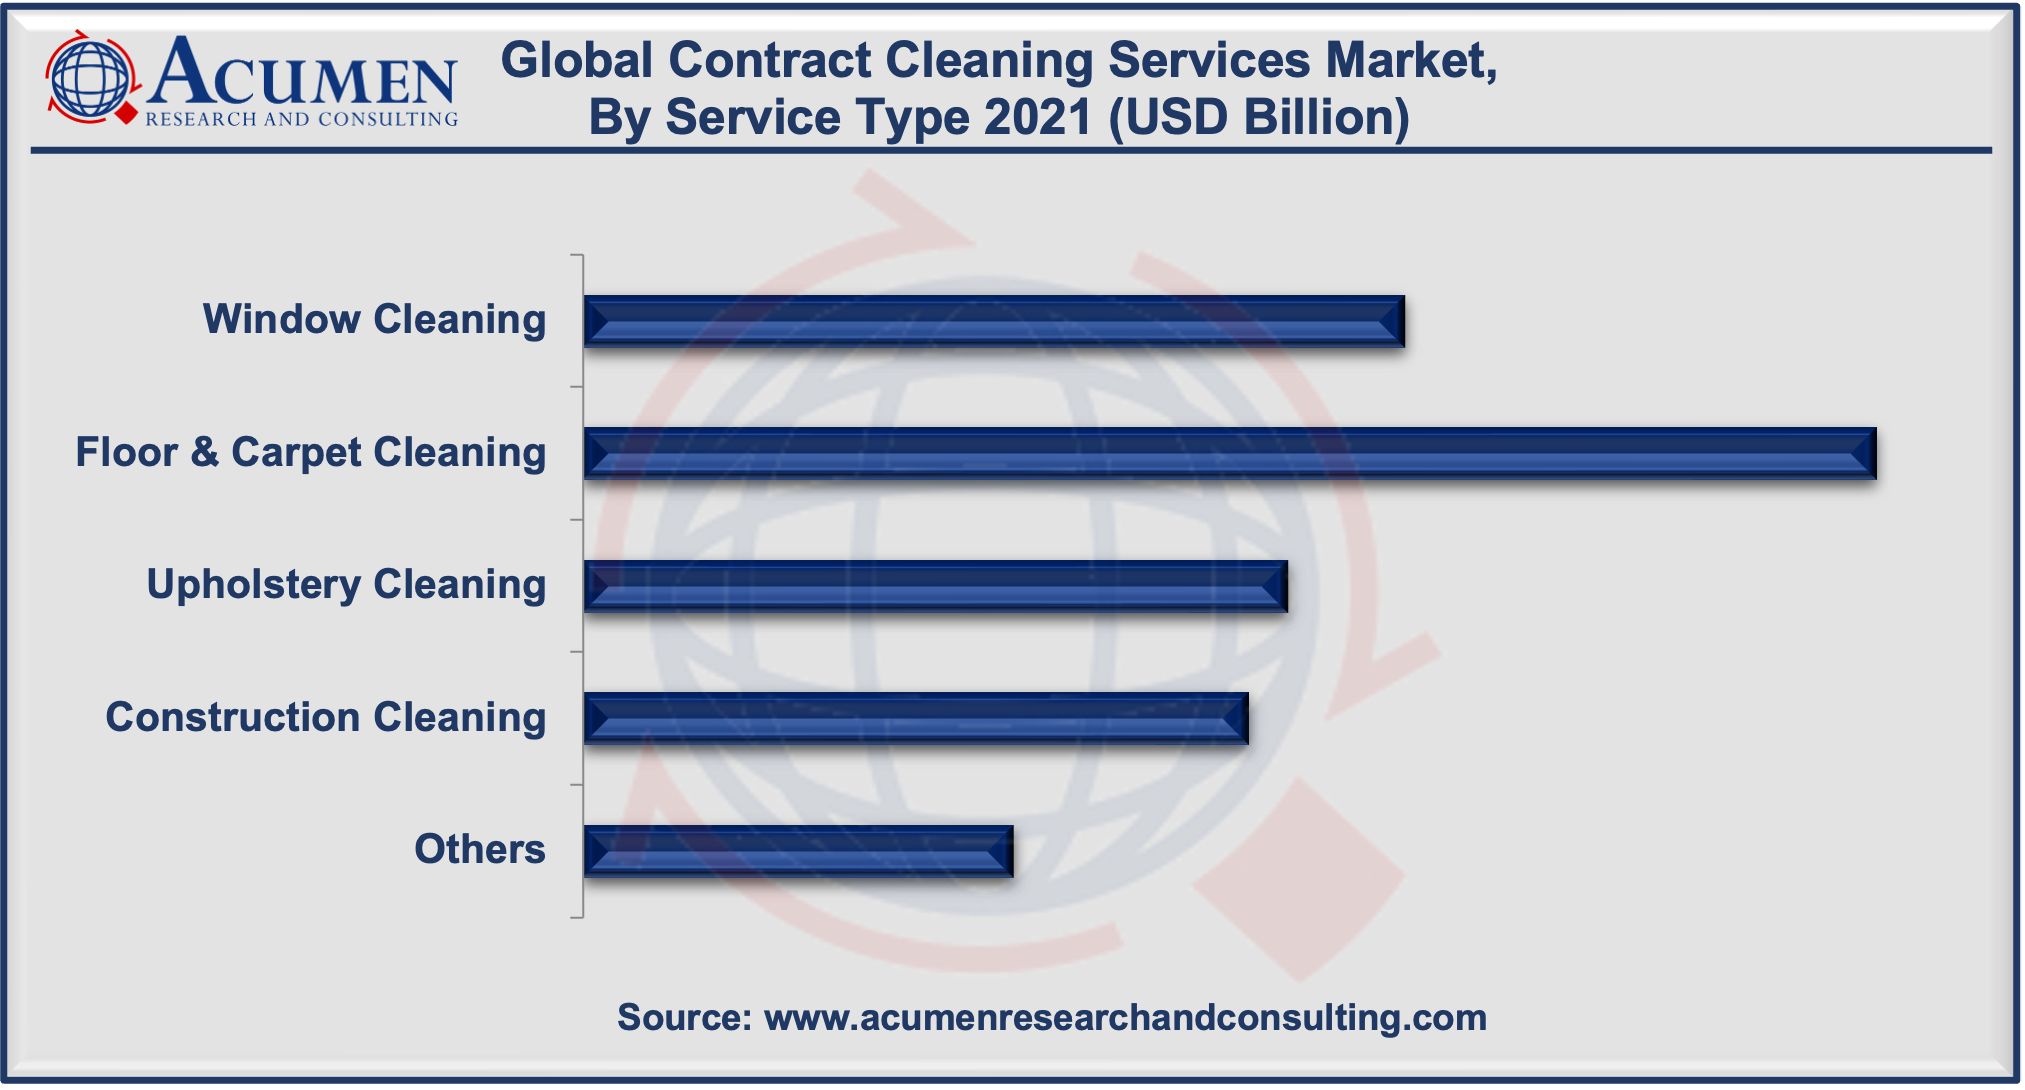 Contract Cleaning Services Market Size is estimated to reach USD 563 Billion by 2030, with a CAGR of 6.3%